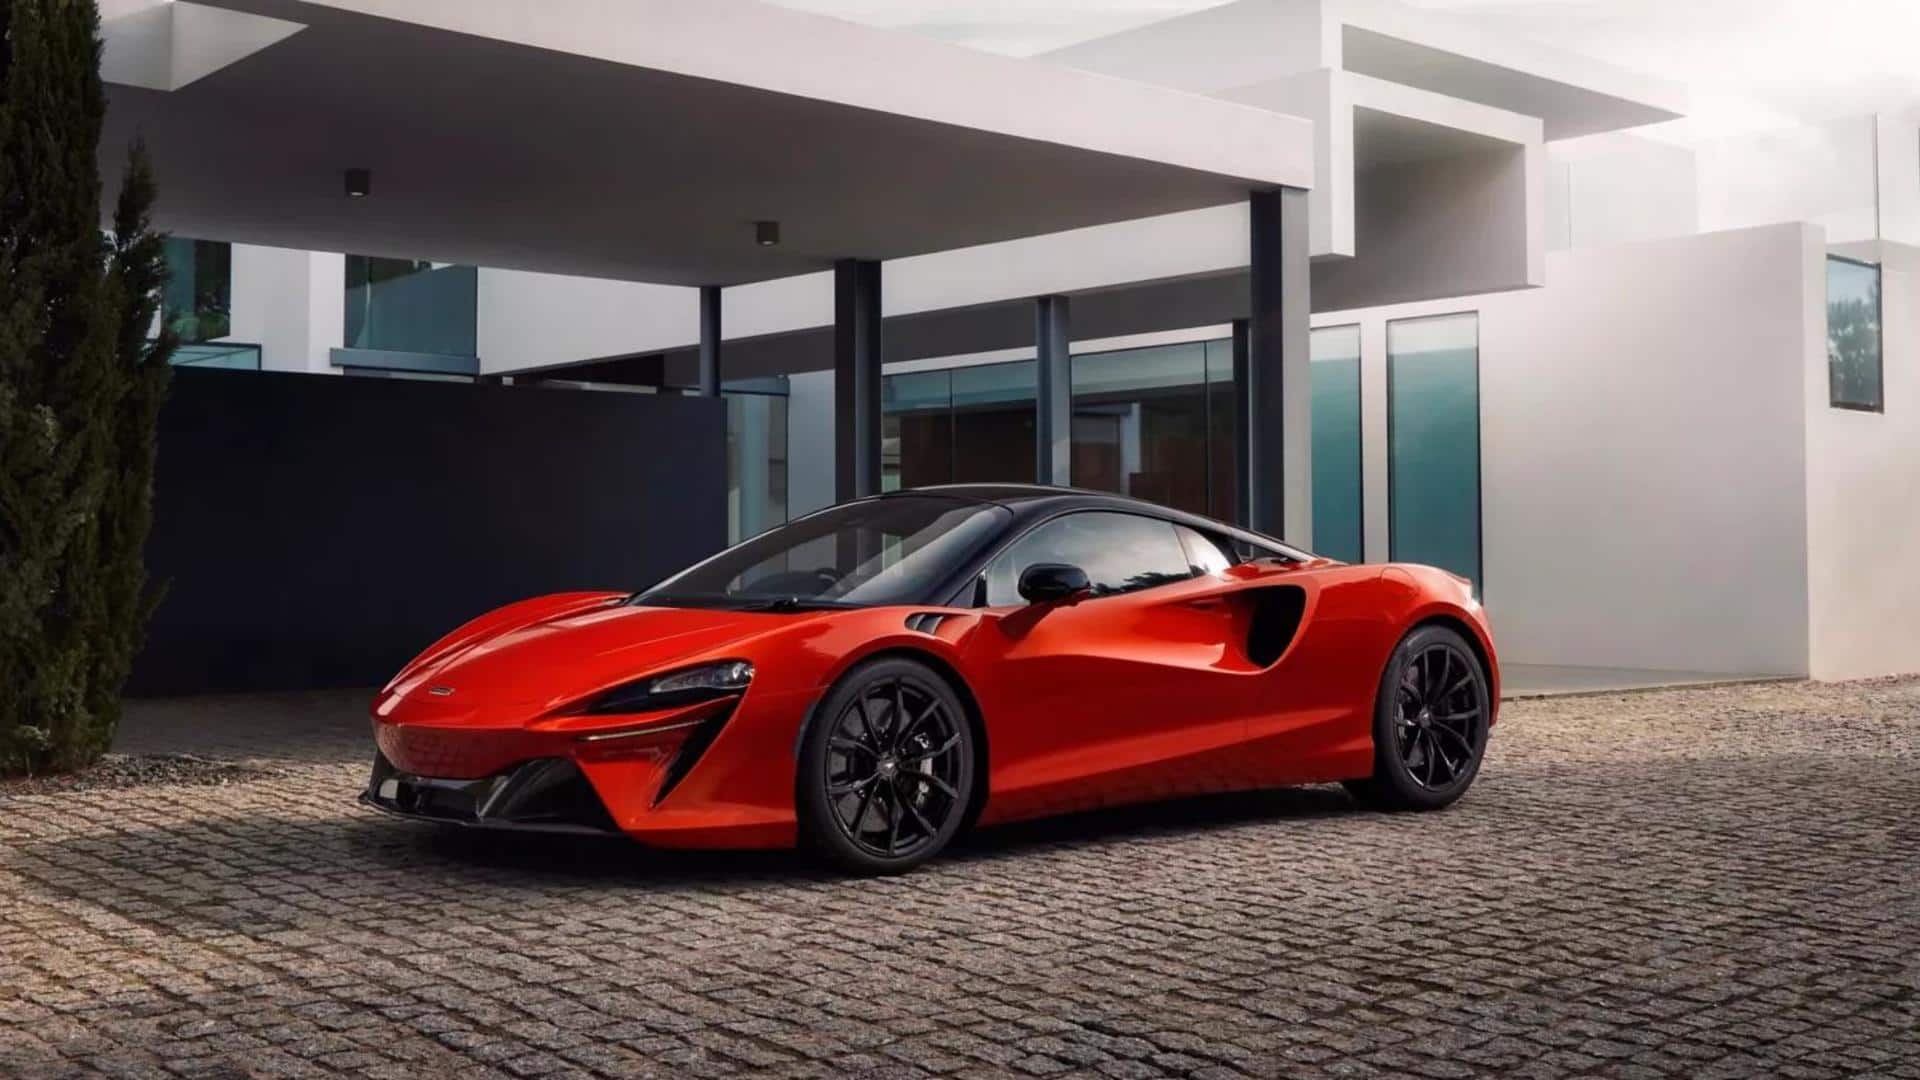 McLaren Artura launched in India at Rs. 5.1 crore